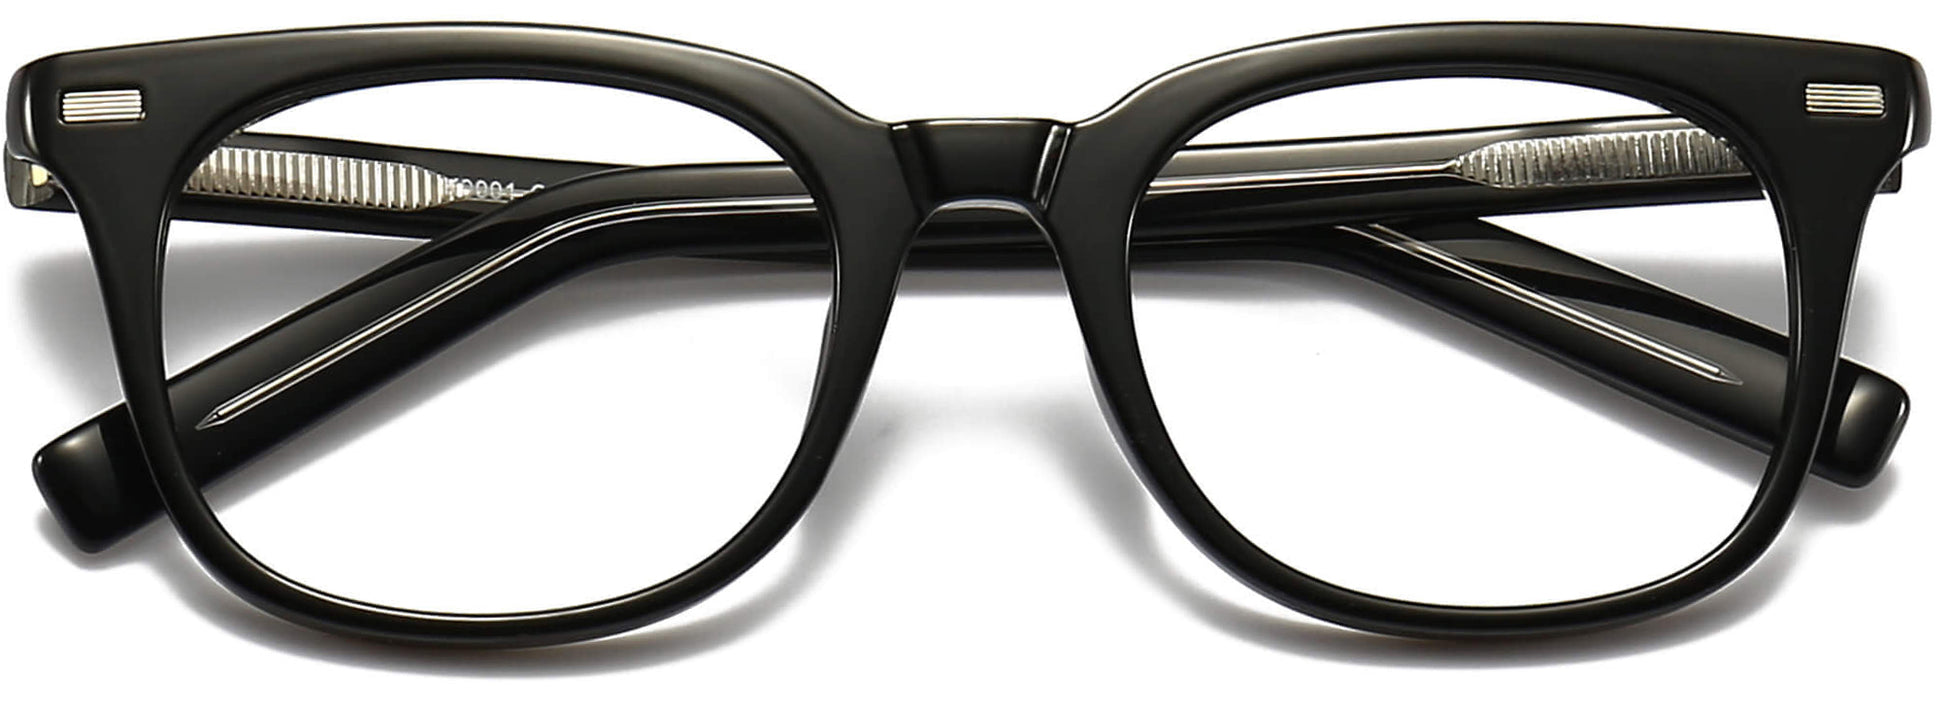 Shiloh Round Black Eyeglasses from ANRRI, closed view